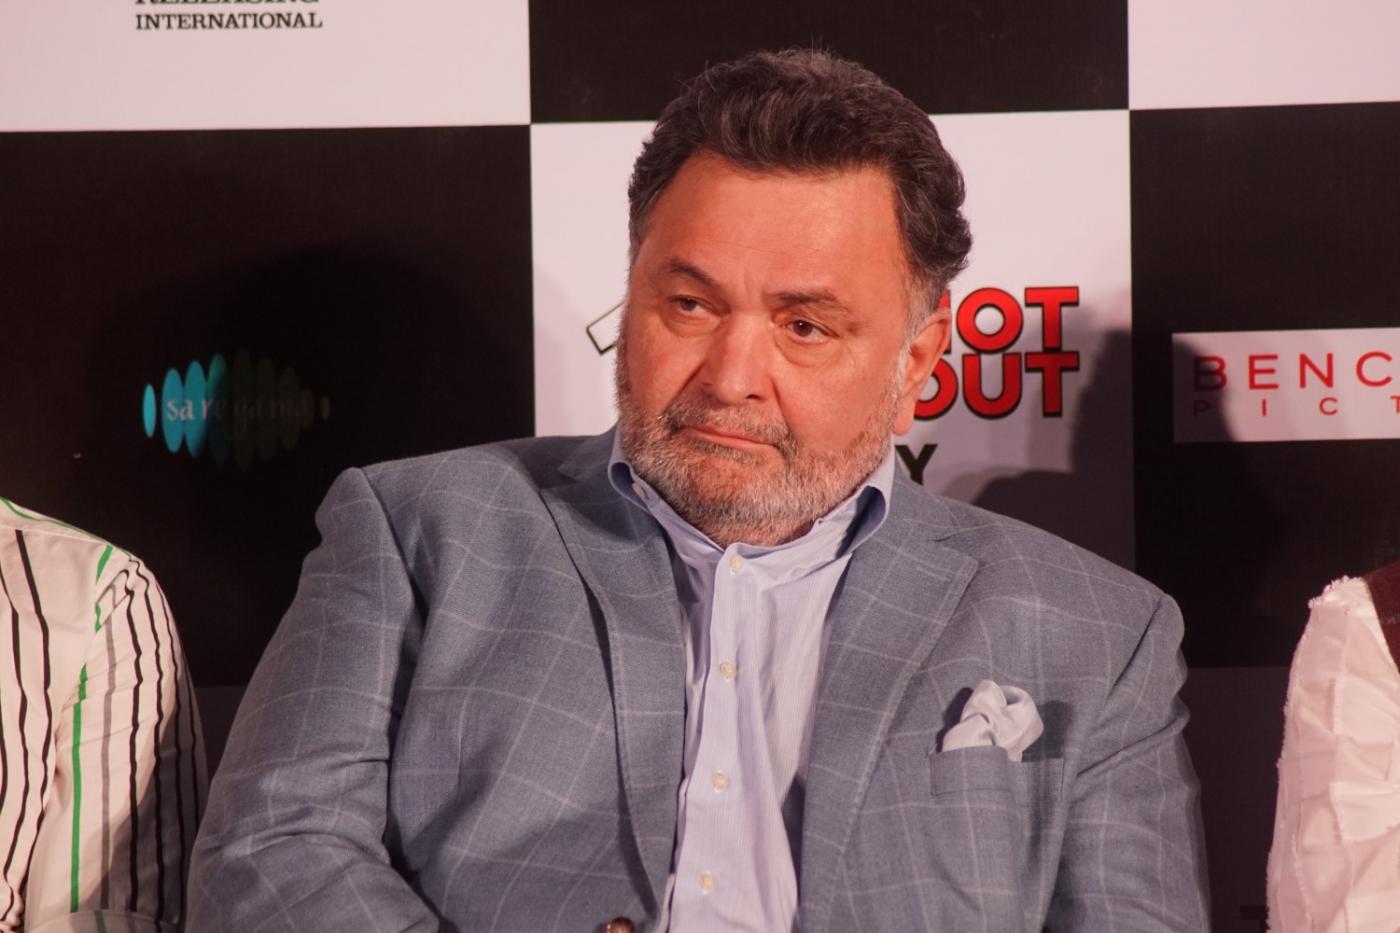 Mumbai: Actor Rishi Kapoor at the song launch of his upcoming film "102 Not Out" in Mumbai on April 19, 2018. (Photo: IANS) by .